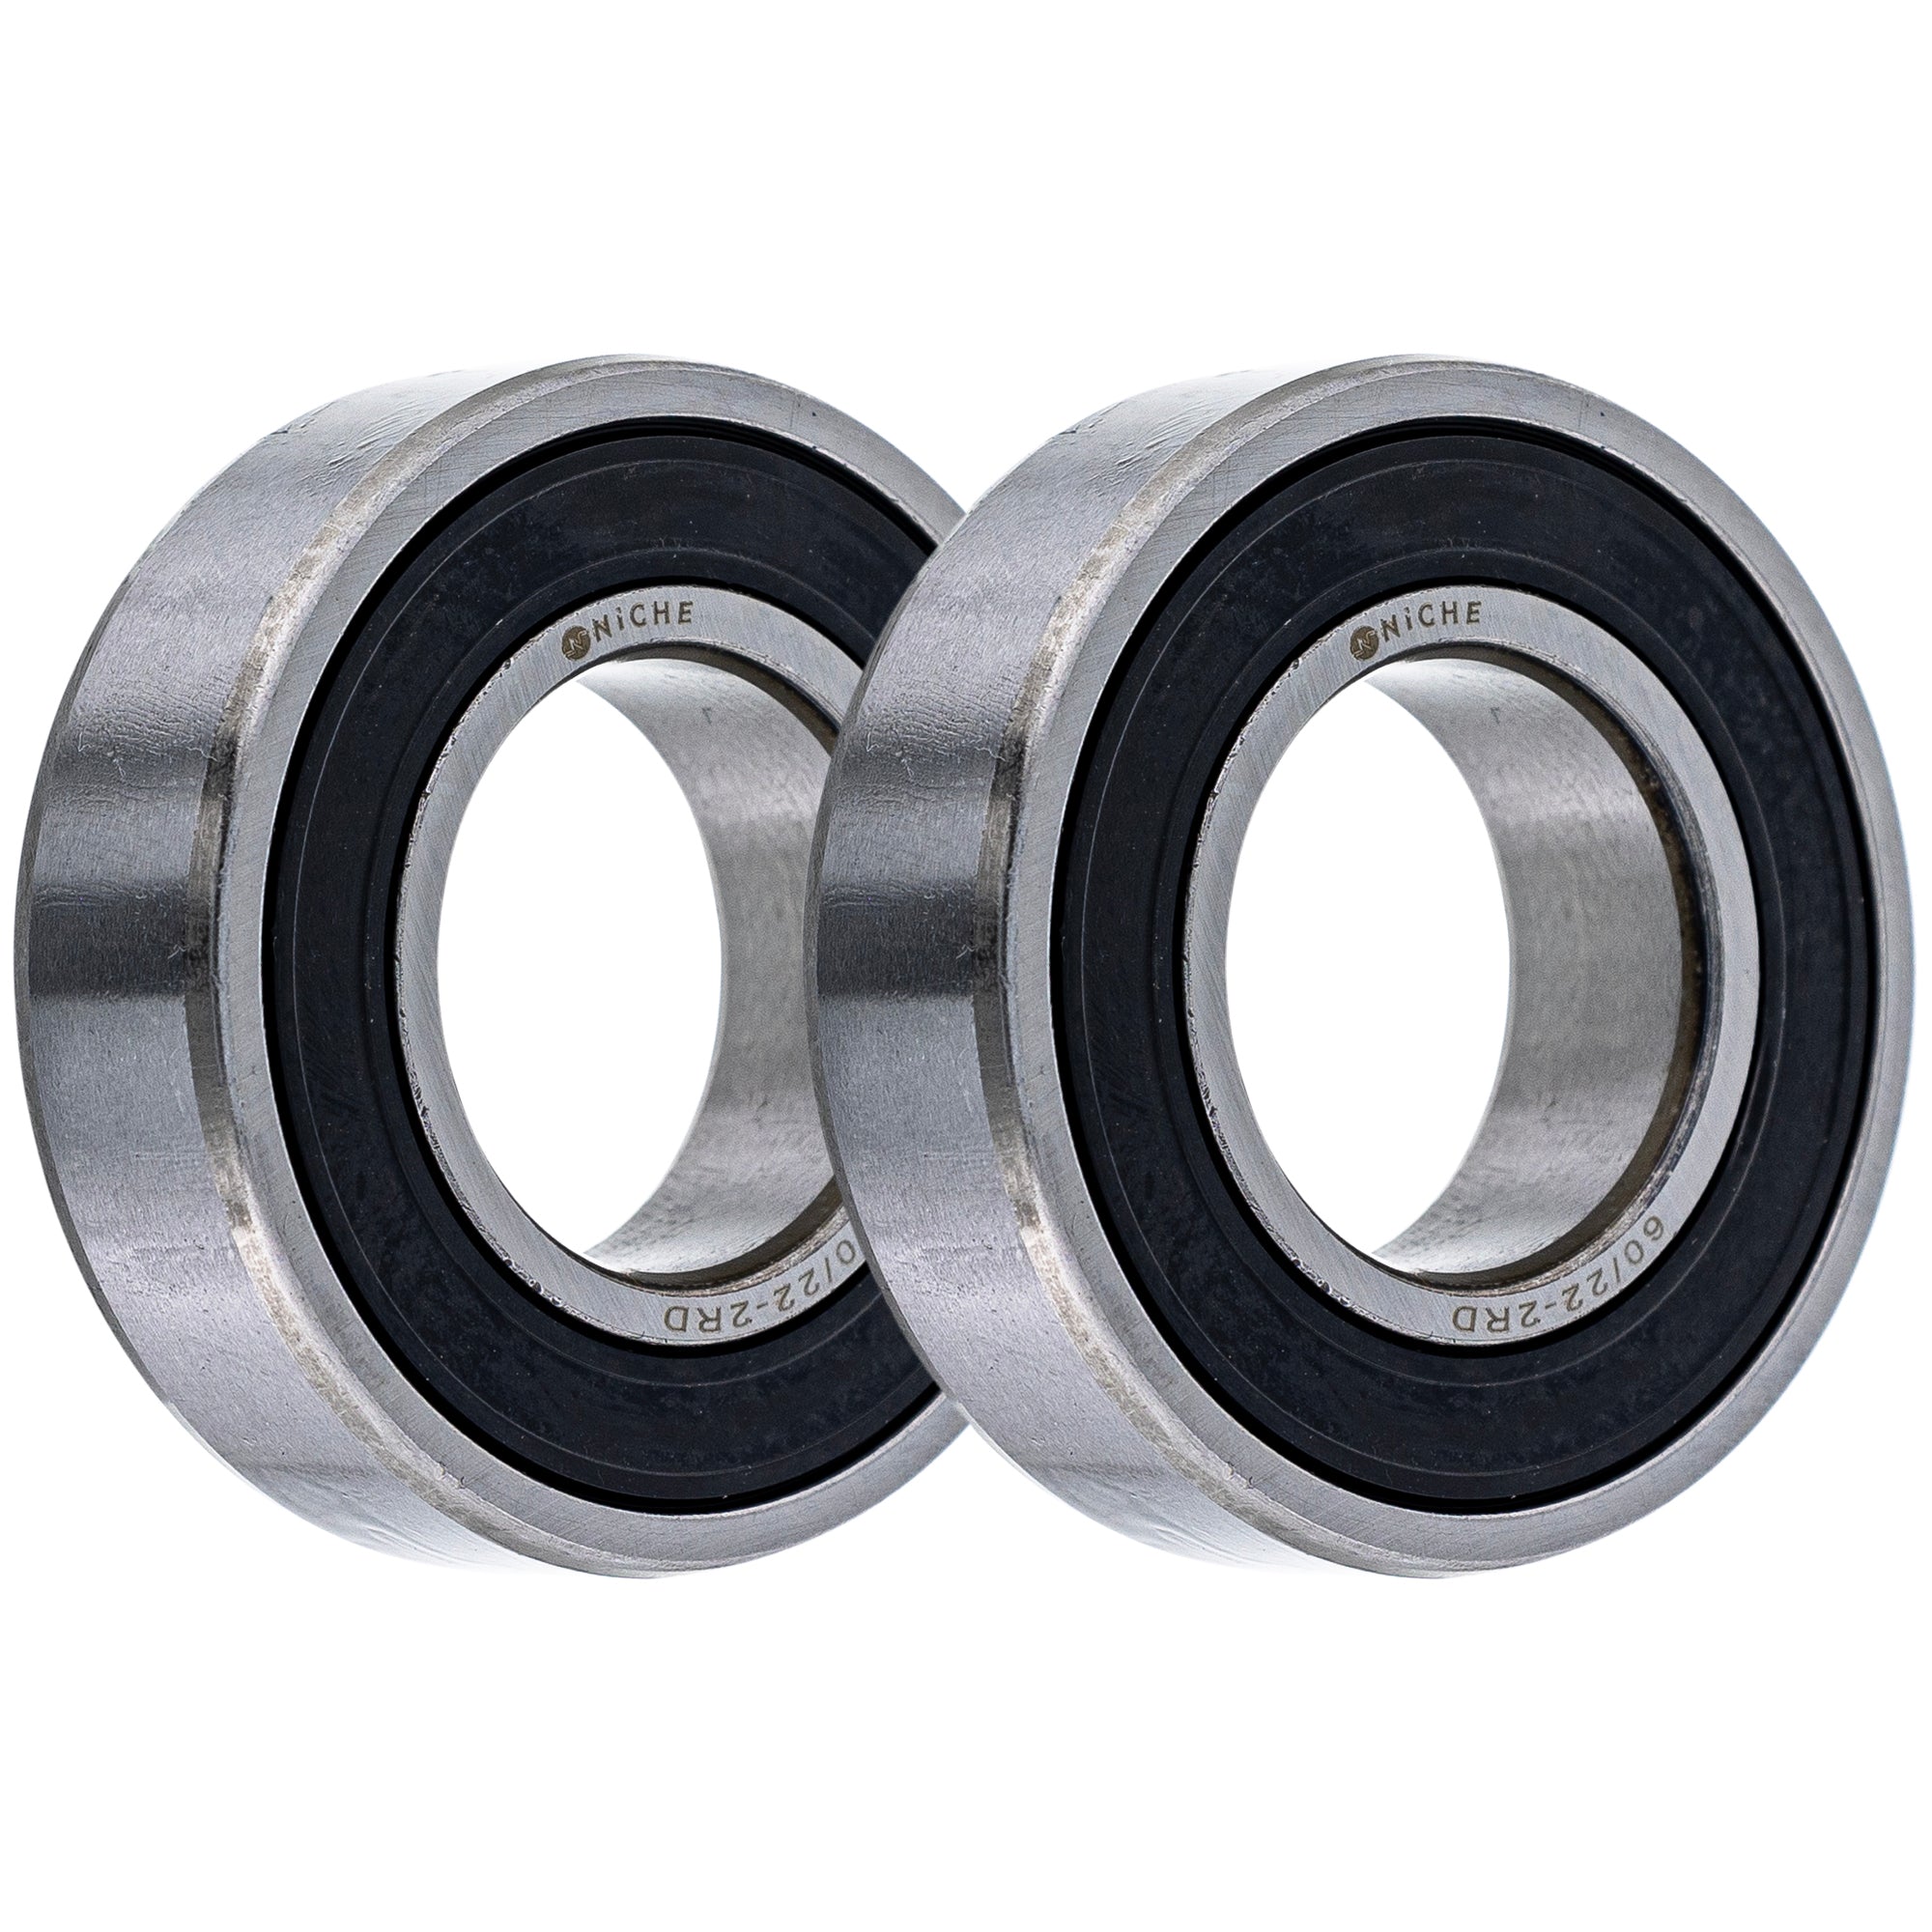 Electric Grade, Single Row, Deep Groove, Ball Bearing Pack of 2 2-Pack for zOTHER YZF750R NICHE 519-CBB2320R